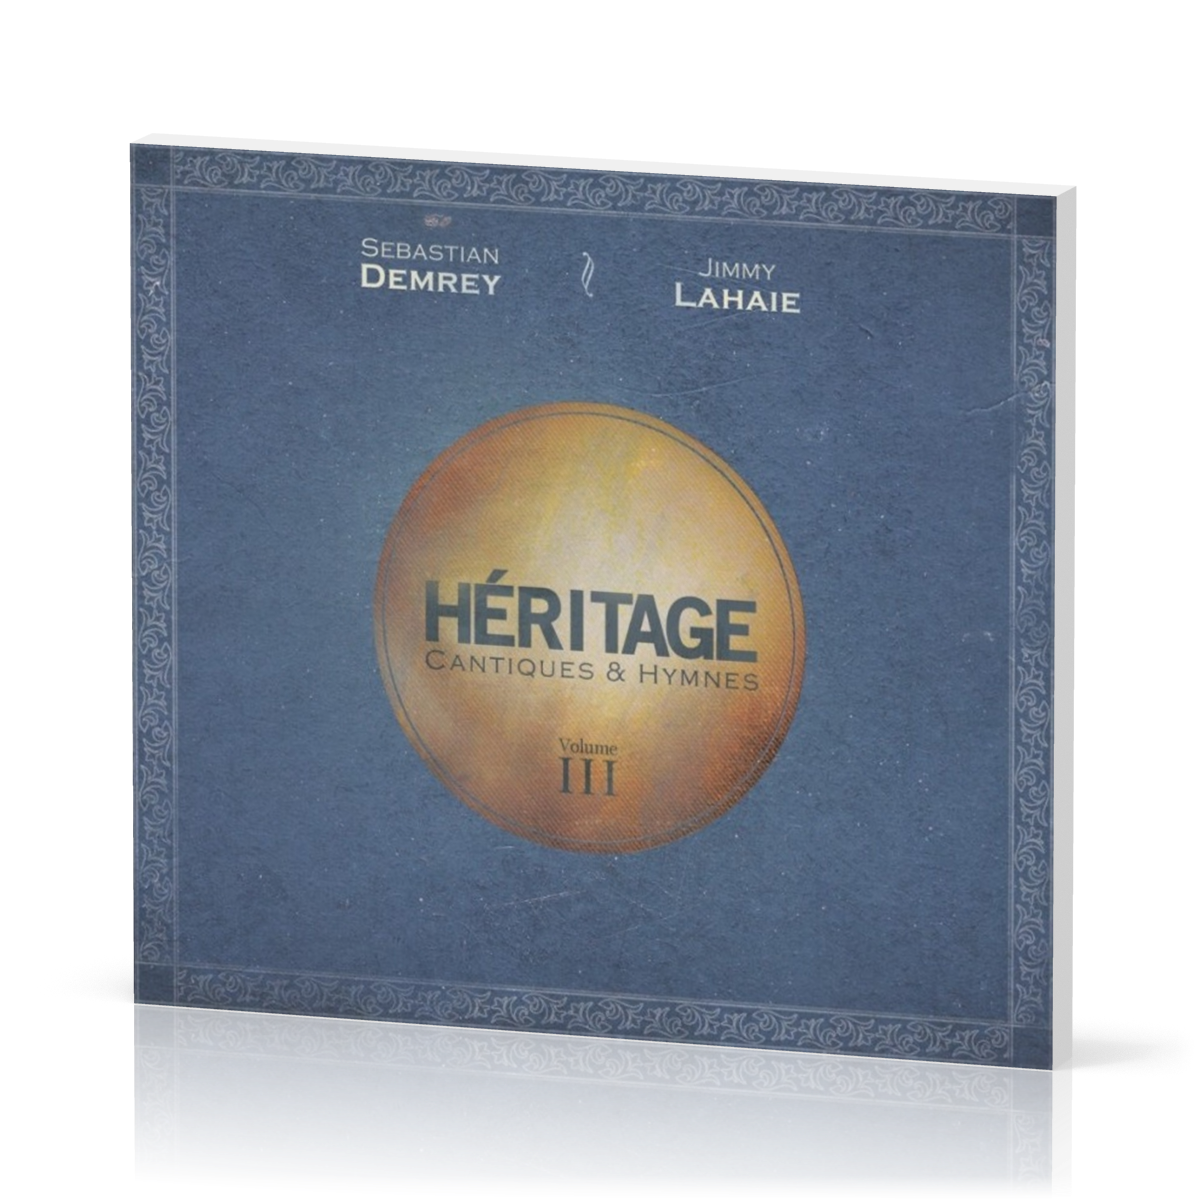 HERITAGE - CANTIQUES & HYMNES VOL. 3 CD